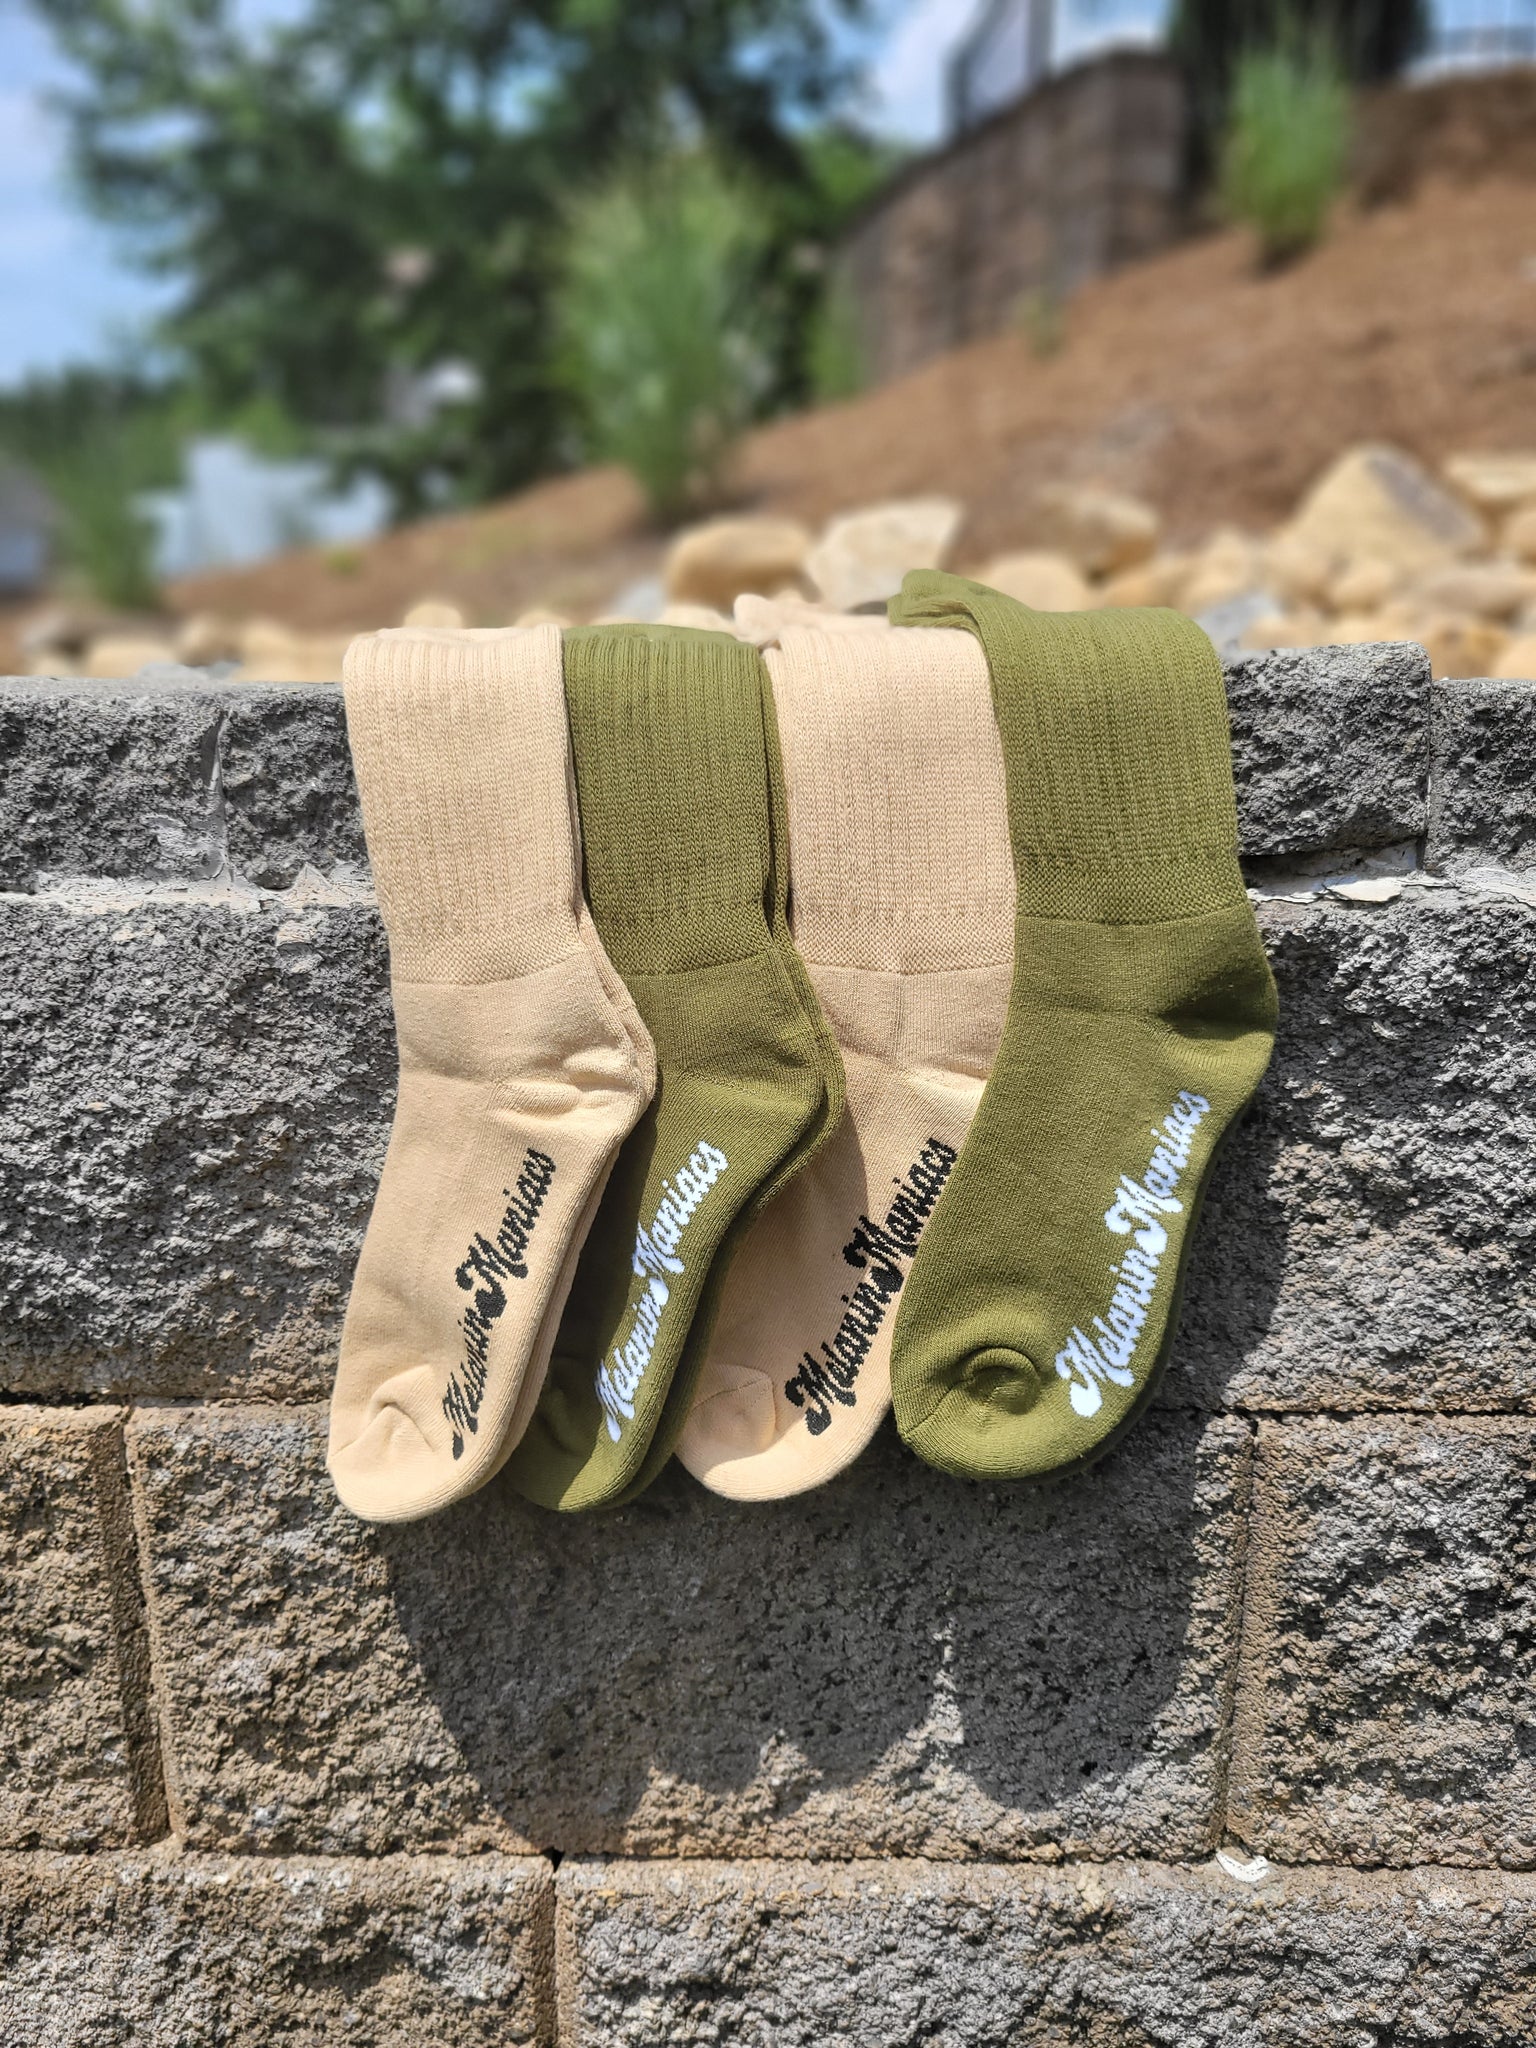 Maniacs Slouch Socks Bundle (Tan and Olive)